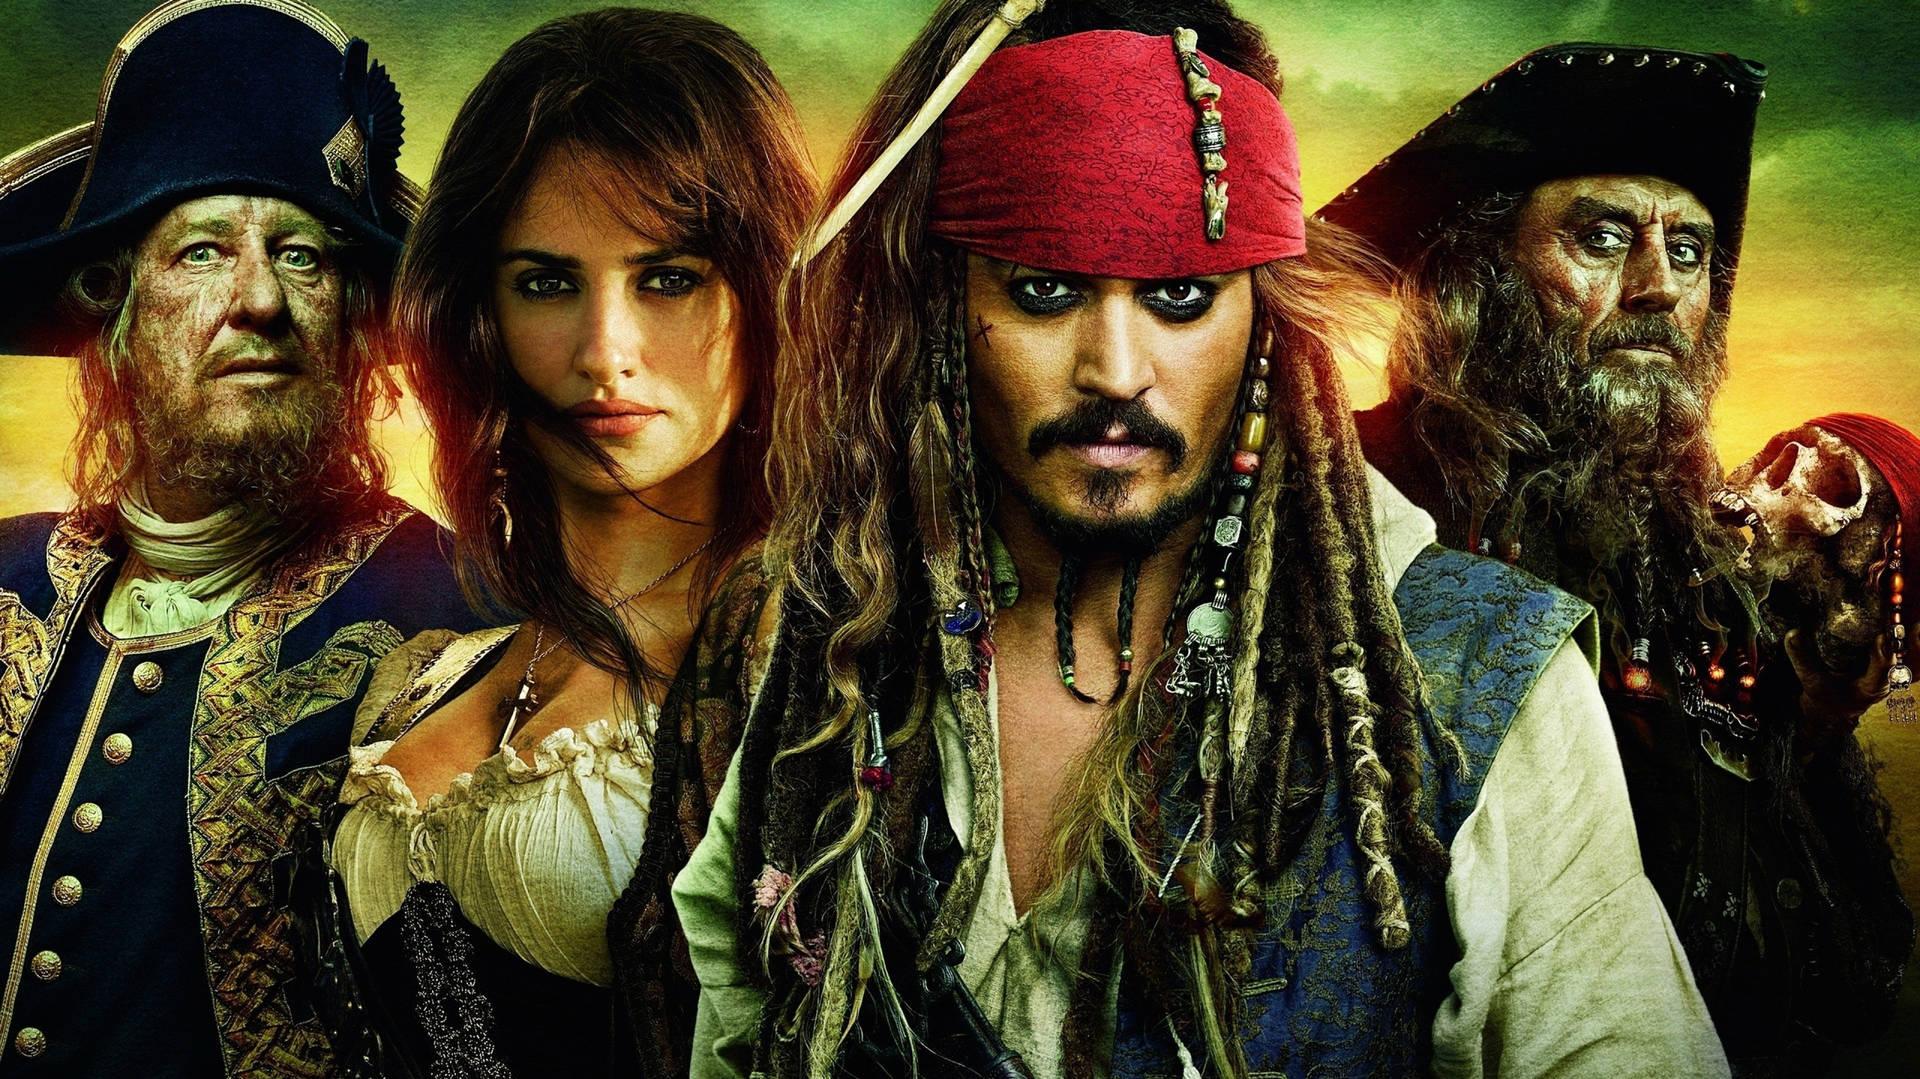 Download Pirates Of The Caribbean On Stranger Tides Casts